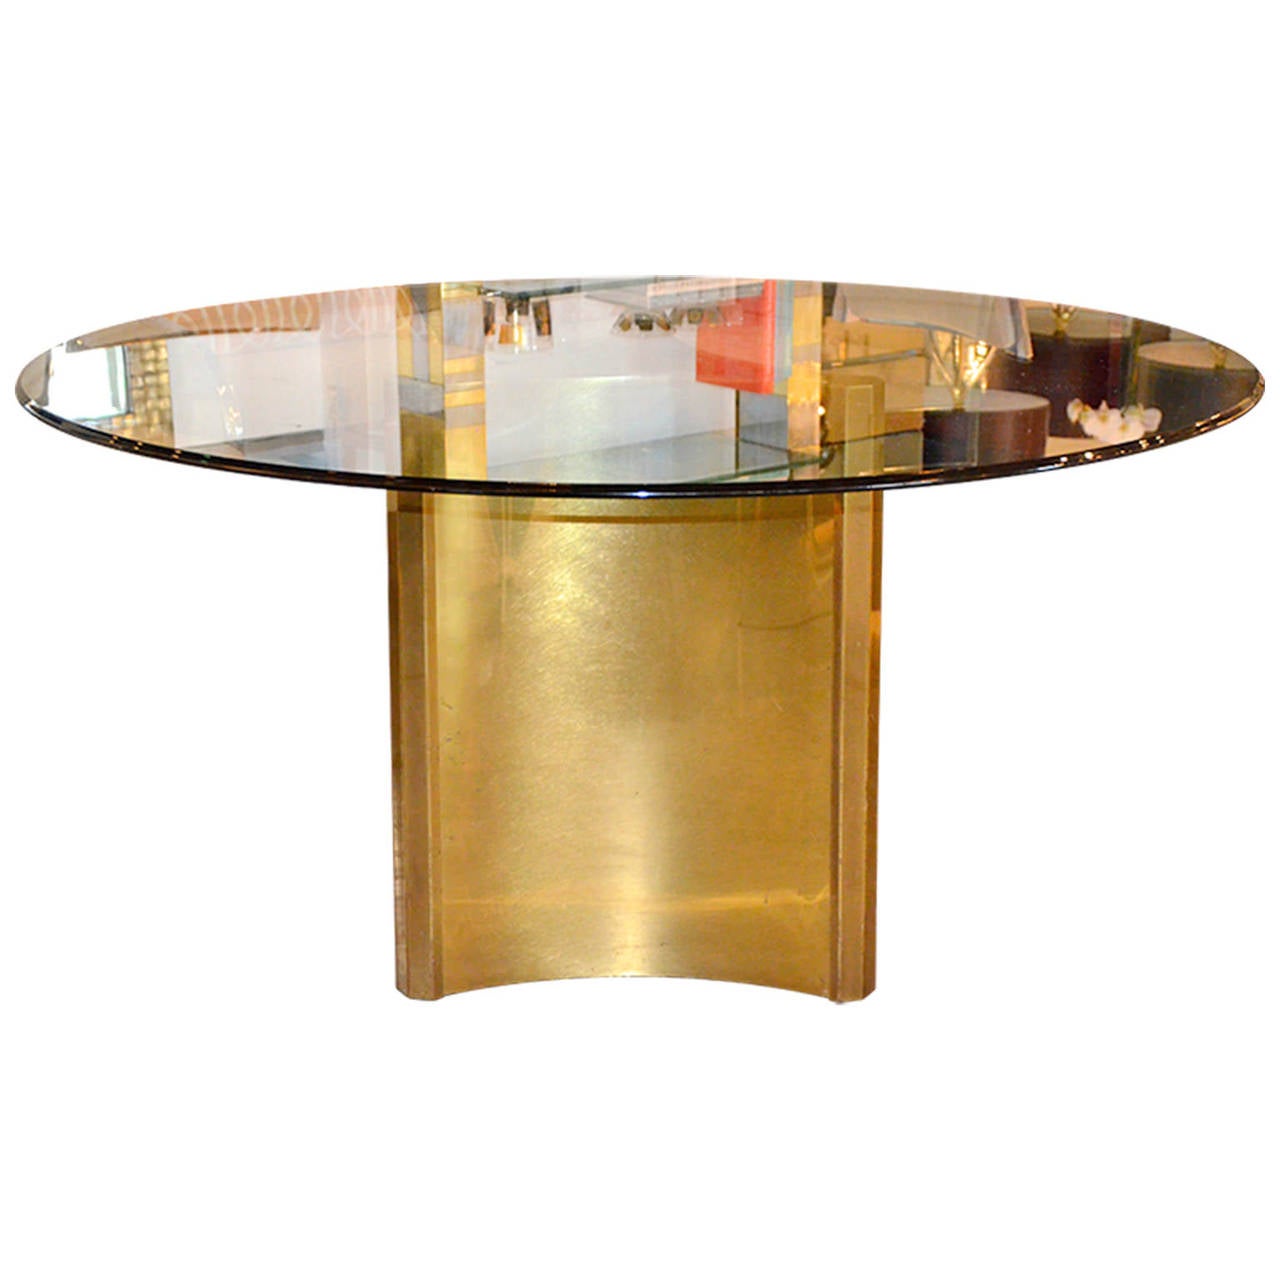 An iconic brass table base by an iconic brass furniture manufacturer, Mastercraft. The Mastercraft brass tri-fold base is quite rare and hard to find. Top with glass, stone or any top of your choice.